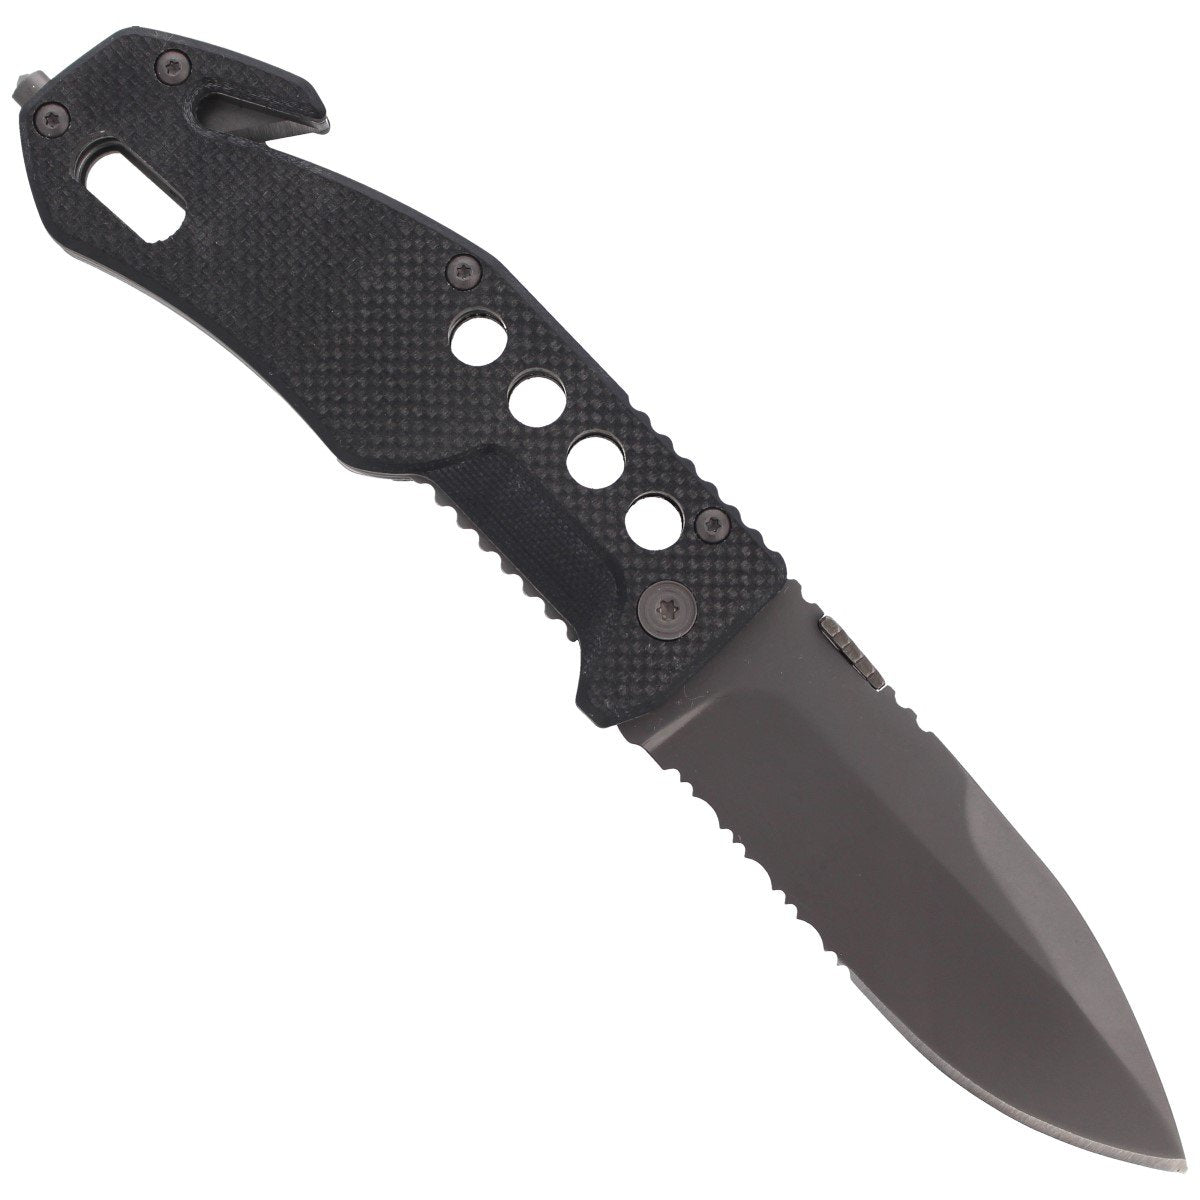 Black Fox Tactical Rescue Folding Knife - BF-115 3